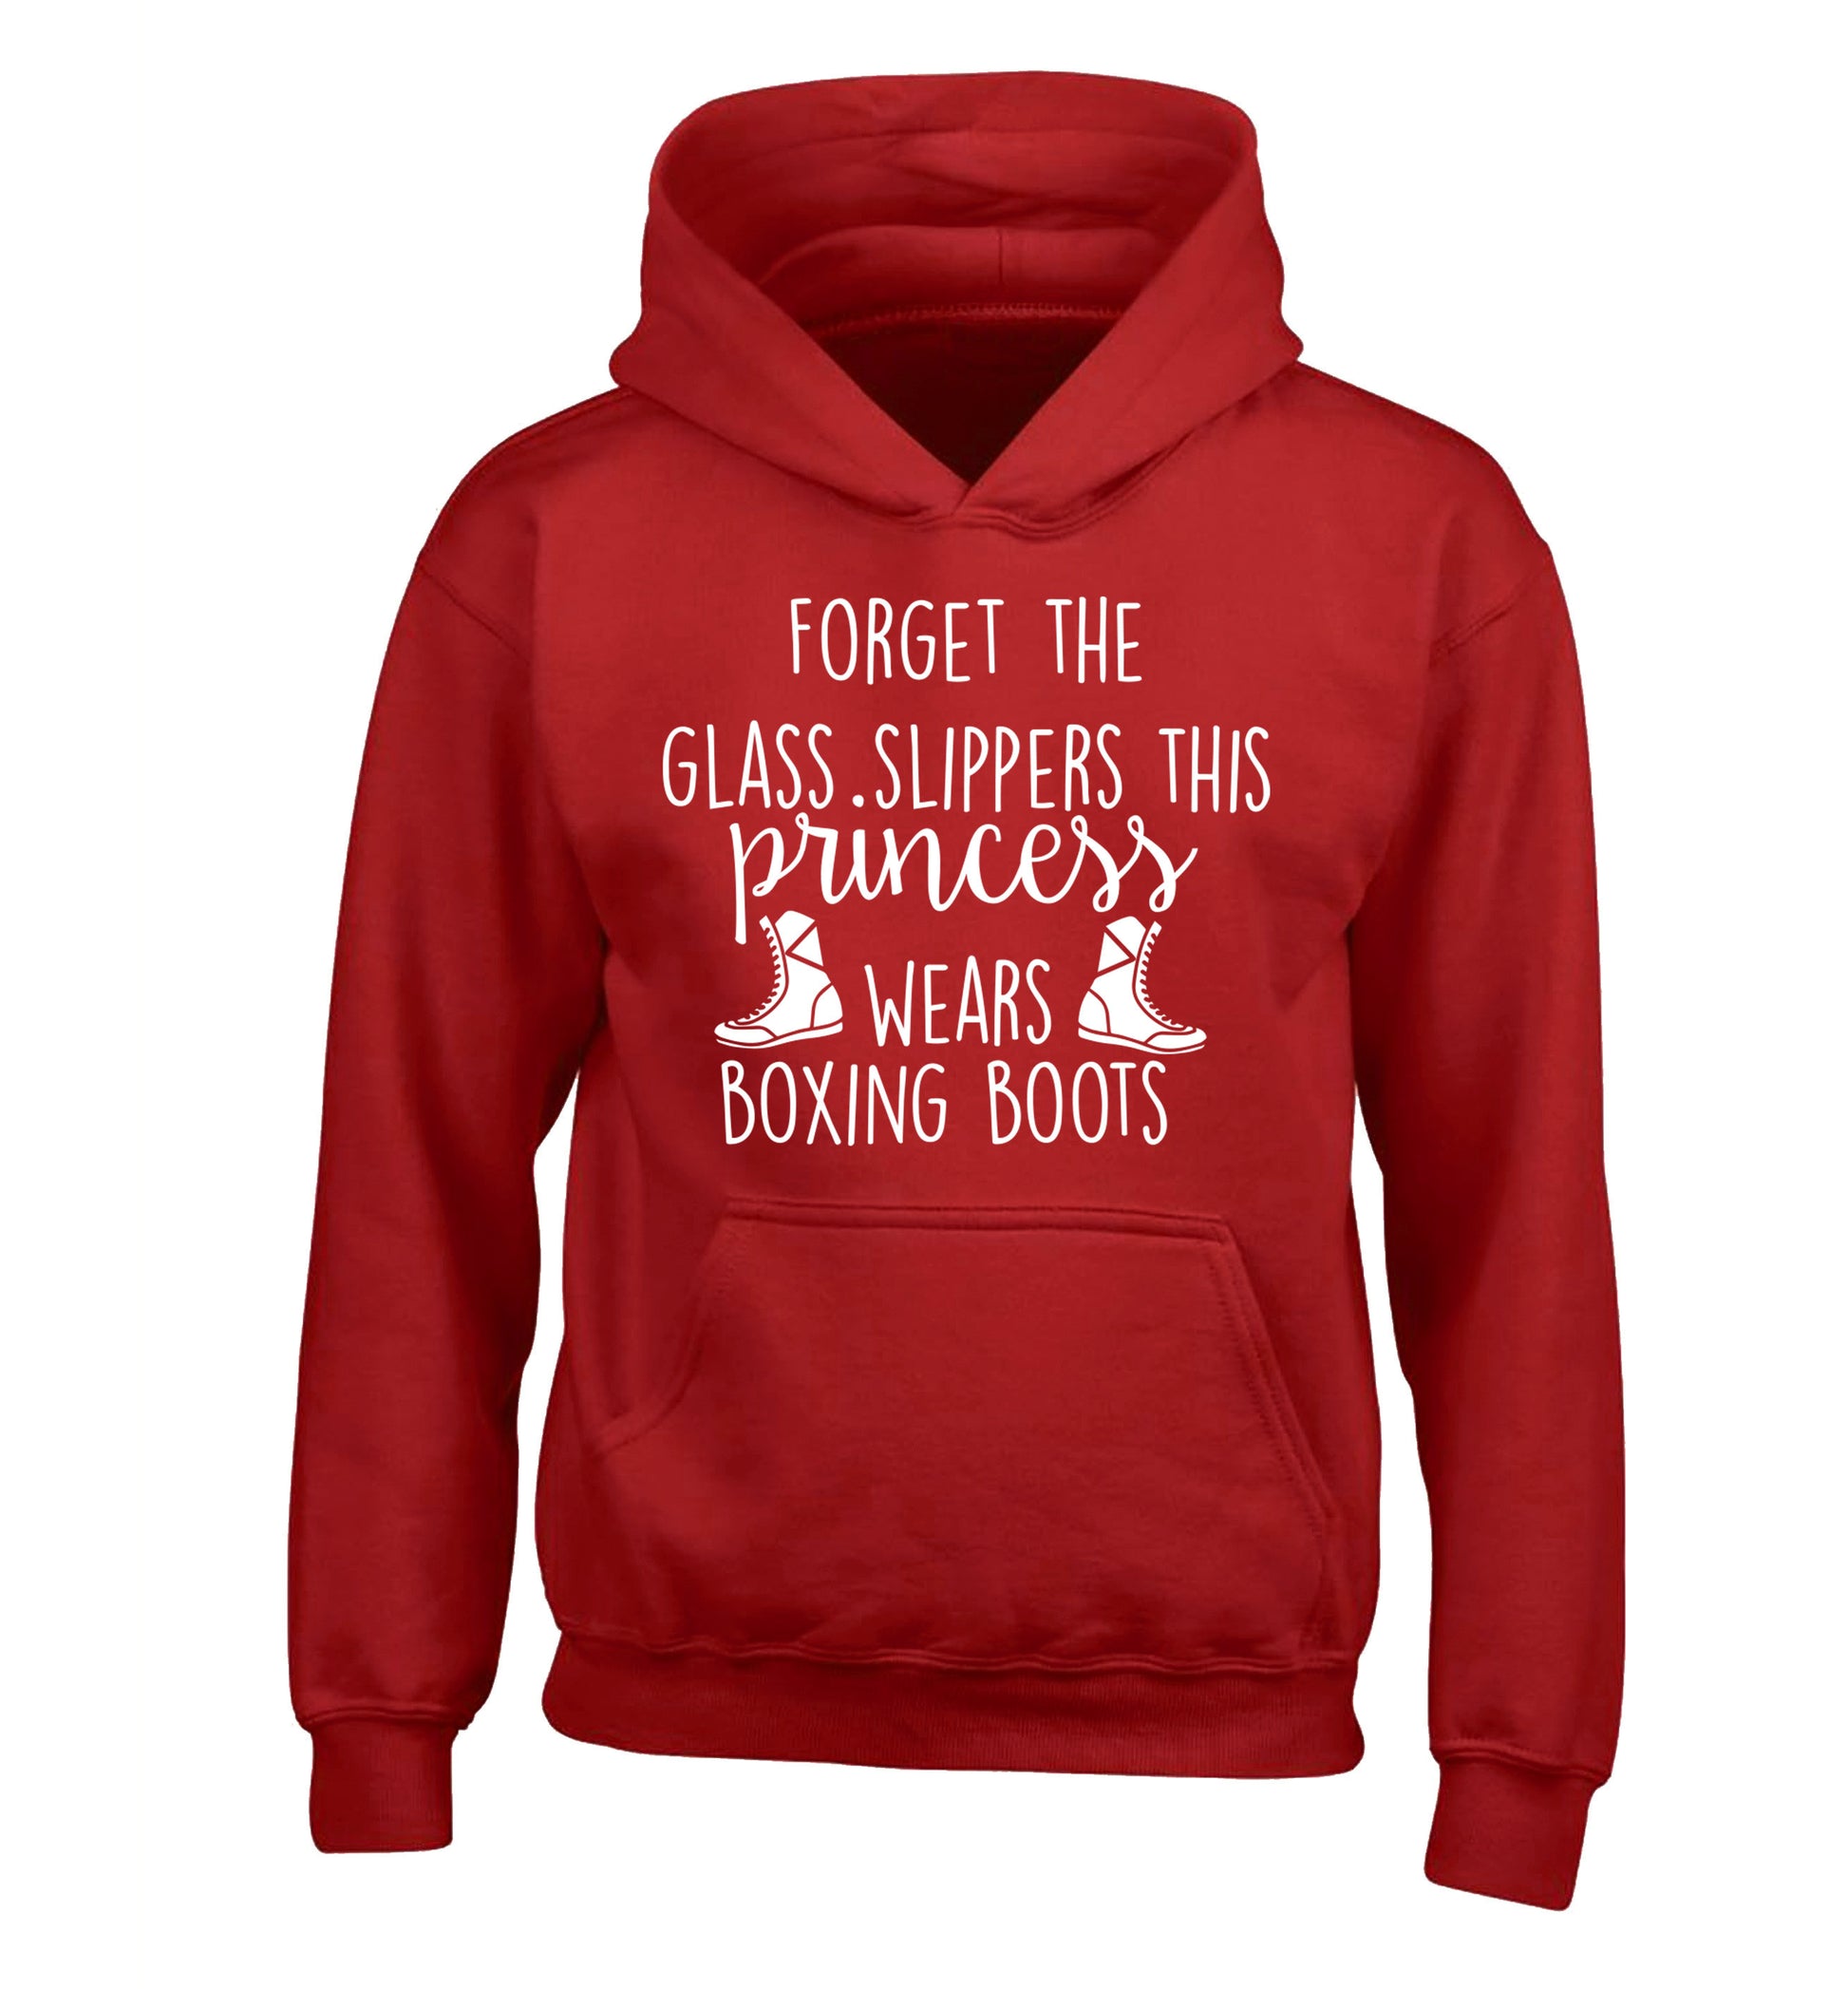 Forget the glass slippers this princess wears boxing boots children's red hoodie 12-14 Years